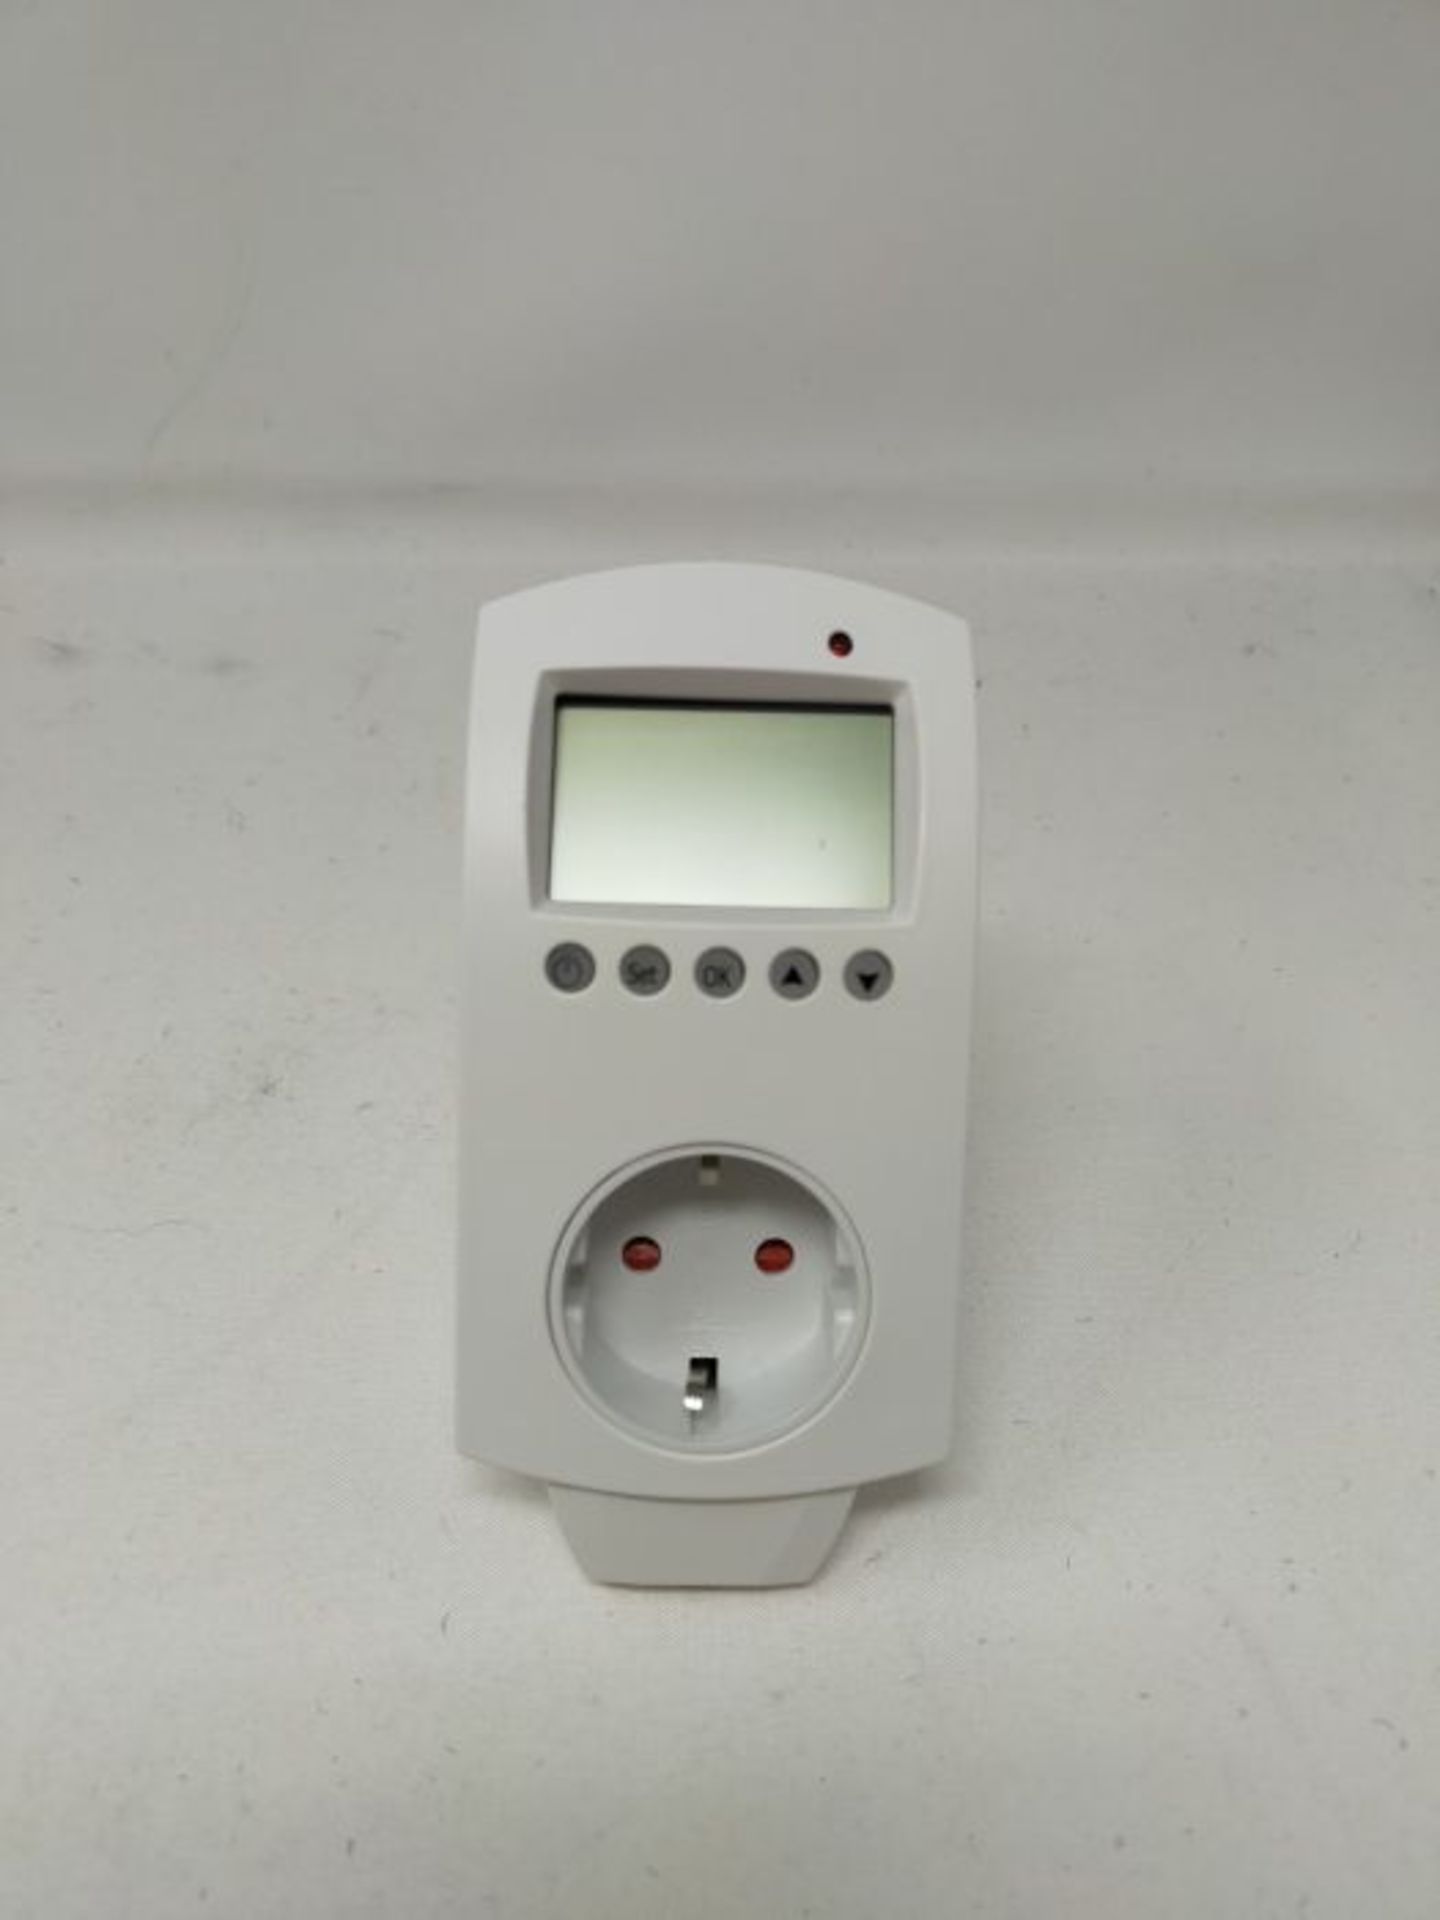 CSL-Computer Digital Thermostat for Heaters Infrared Heaters with Frost Guard Backup B - Image 3 of 3